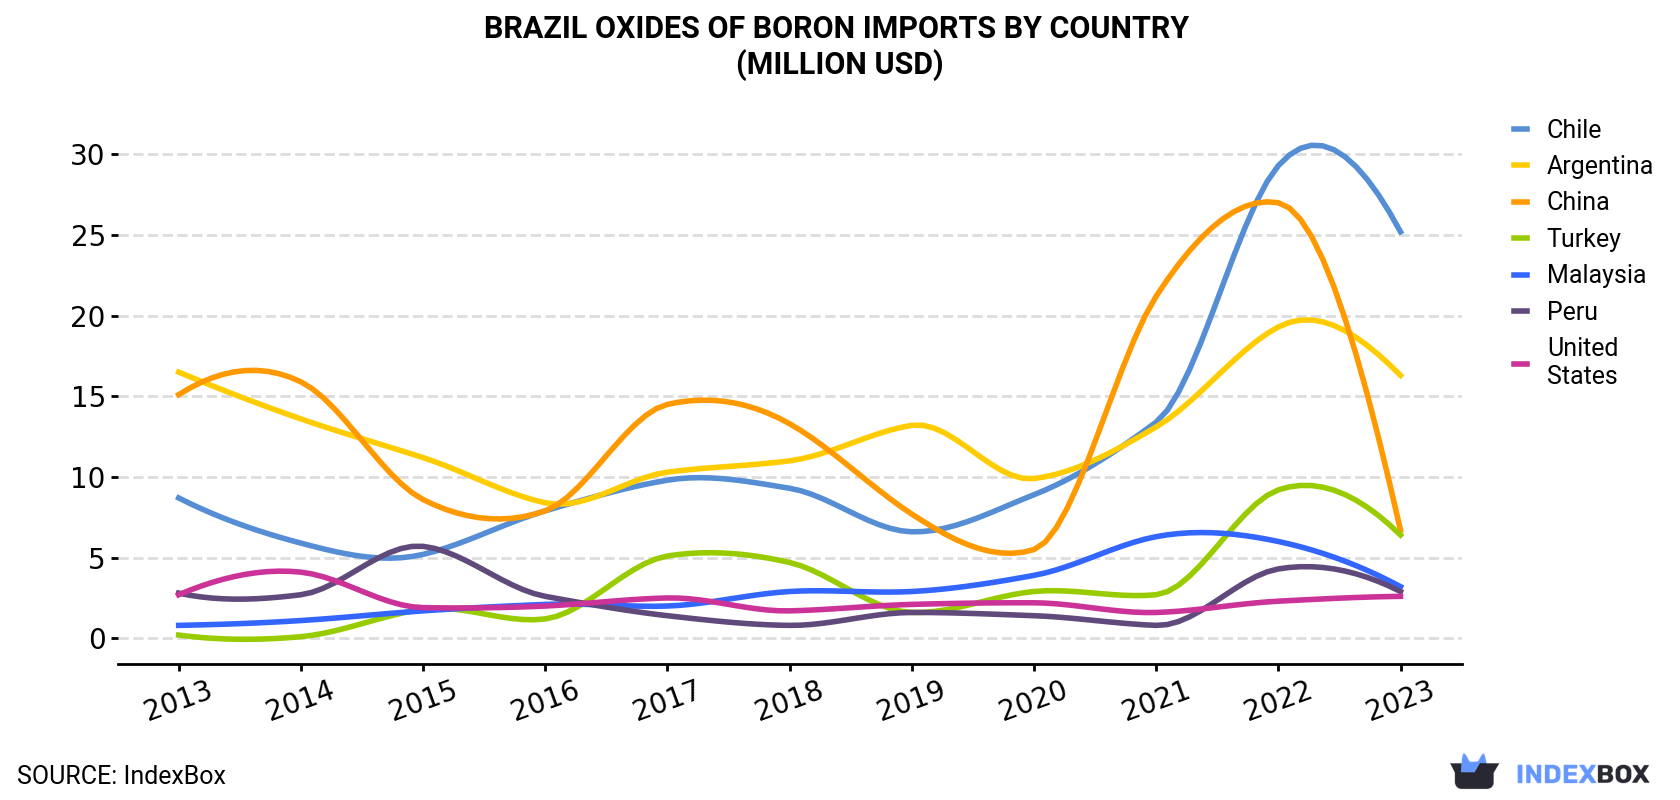 Brazil Oxides Of Boron Imports By Country (Million USD)